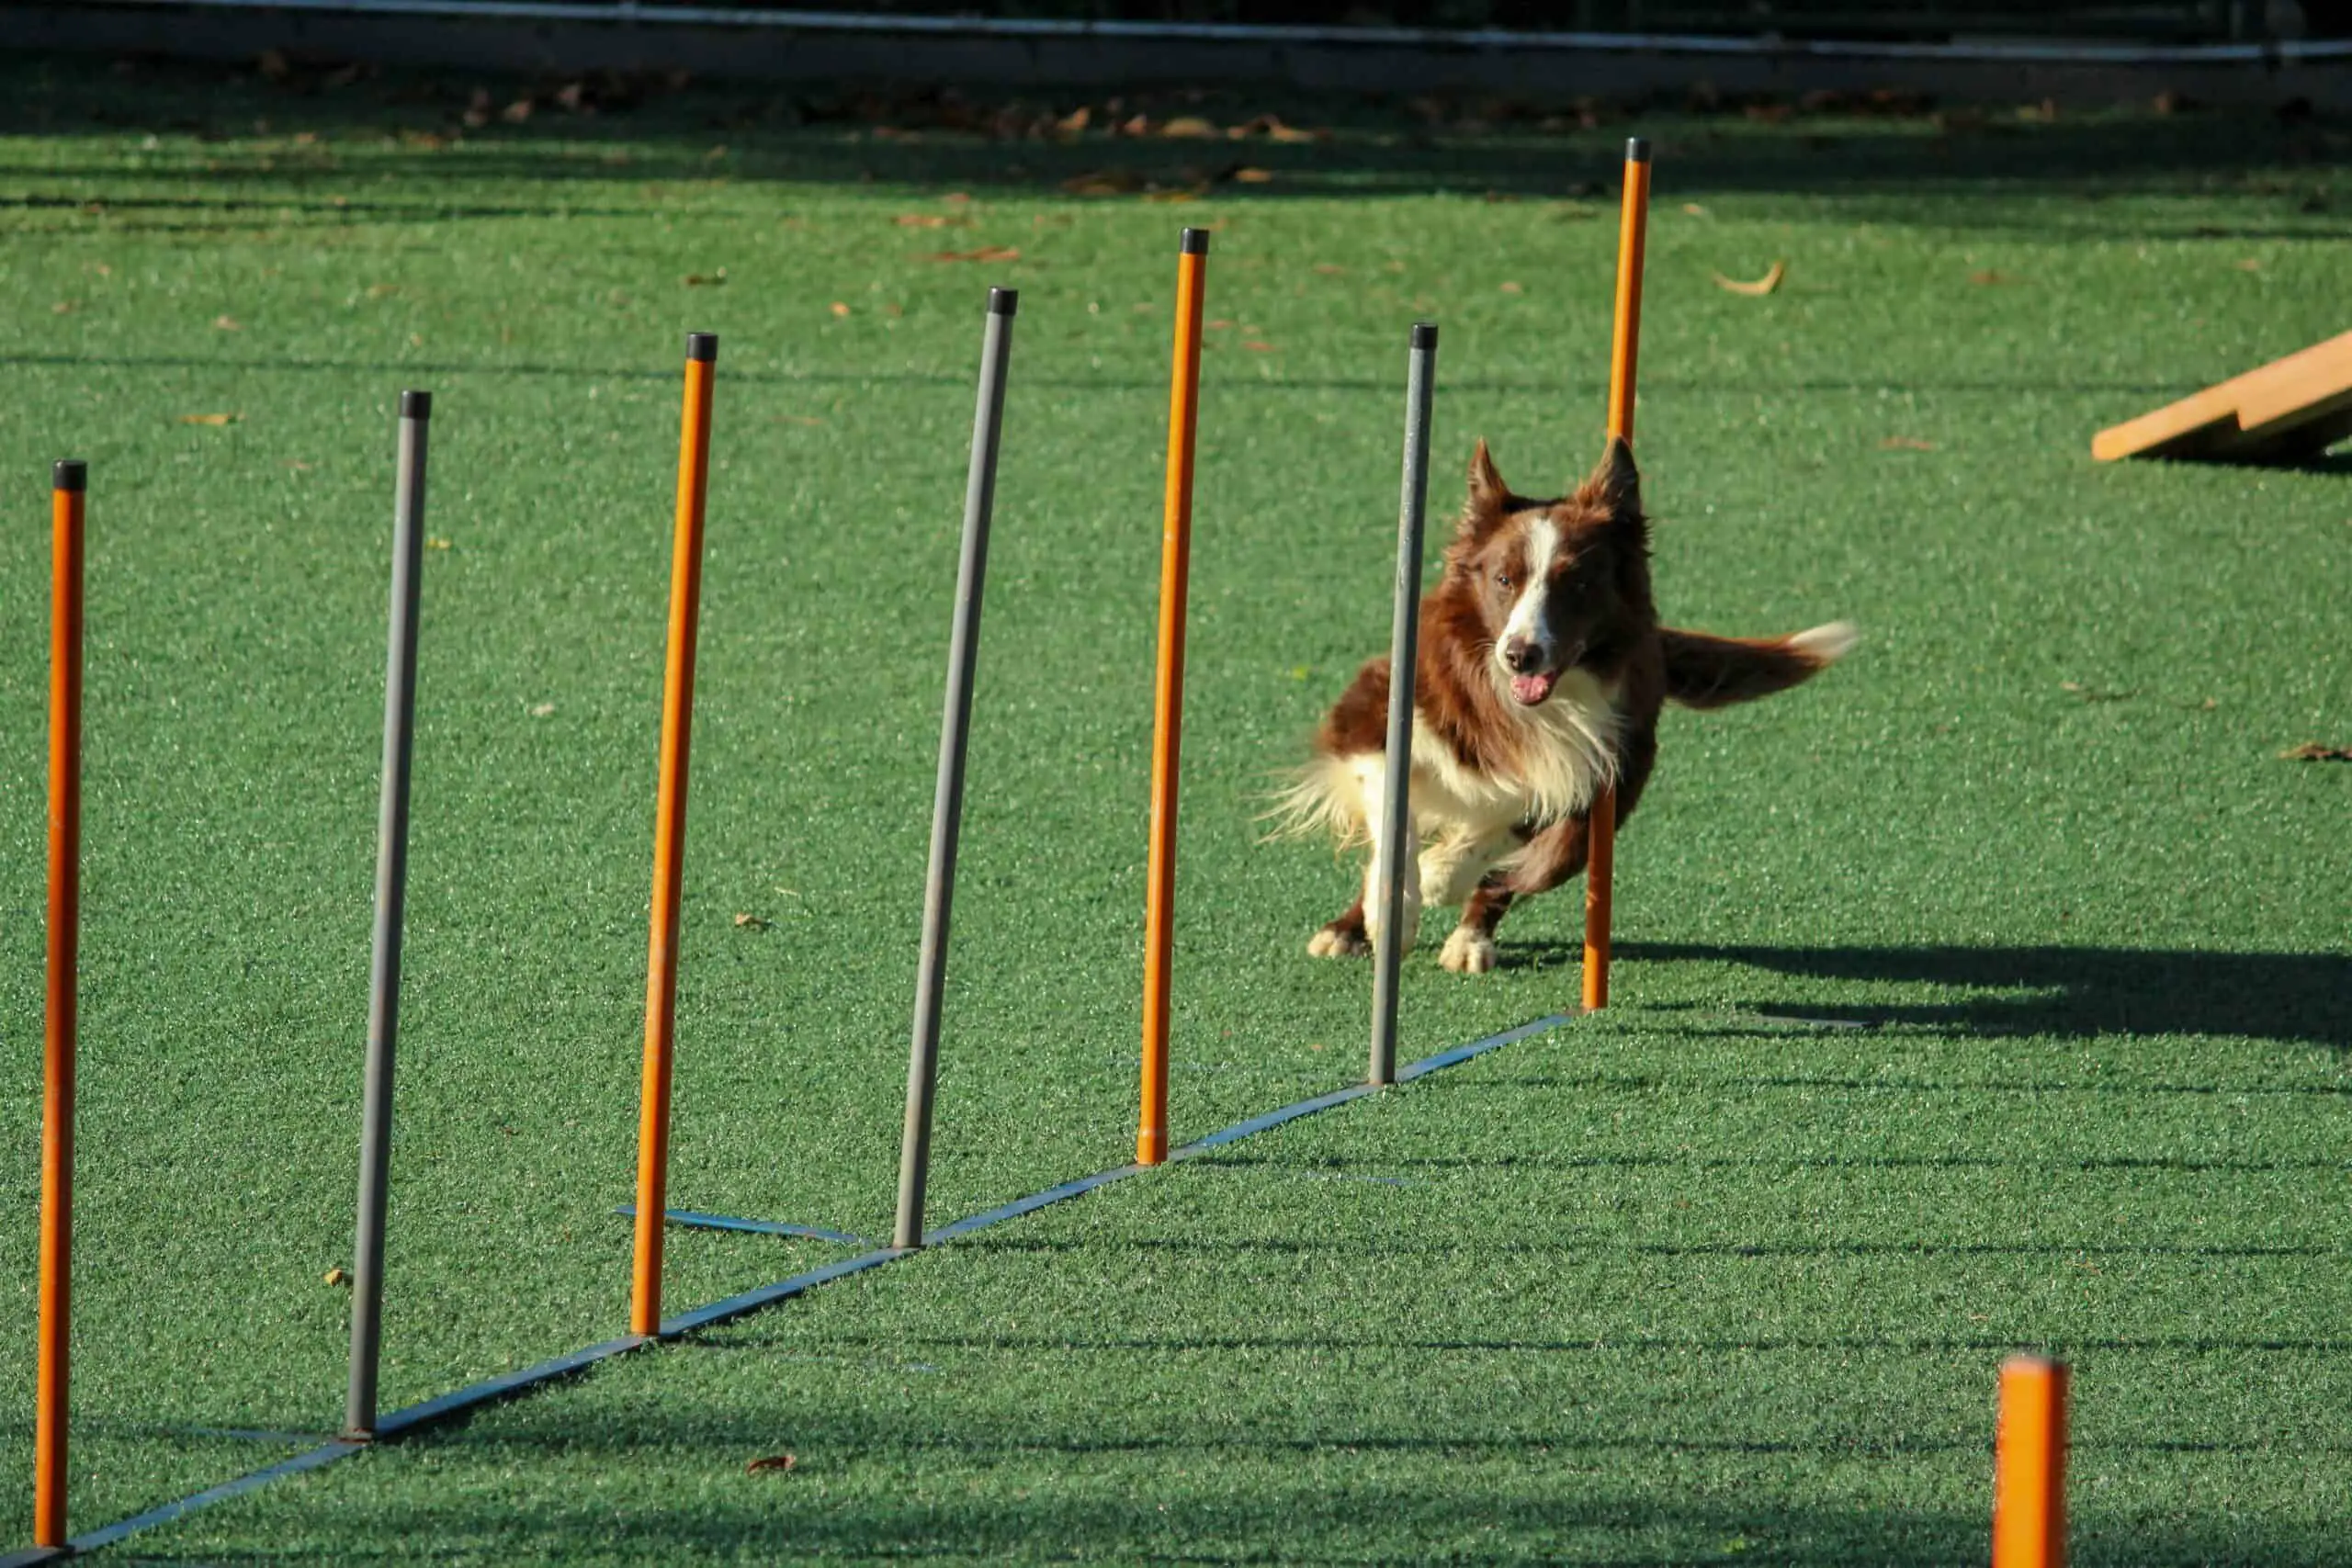 Training Small Dogs: How To Know if Small Dogs Or Large Dogs Are More Difficult?